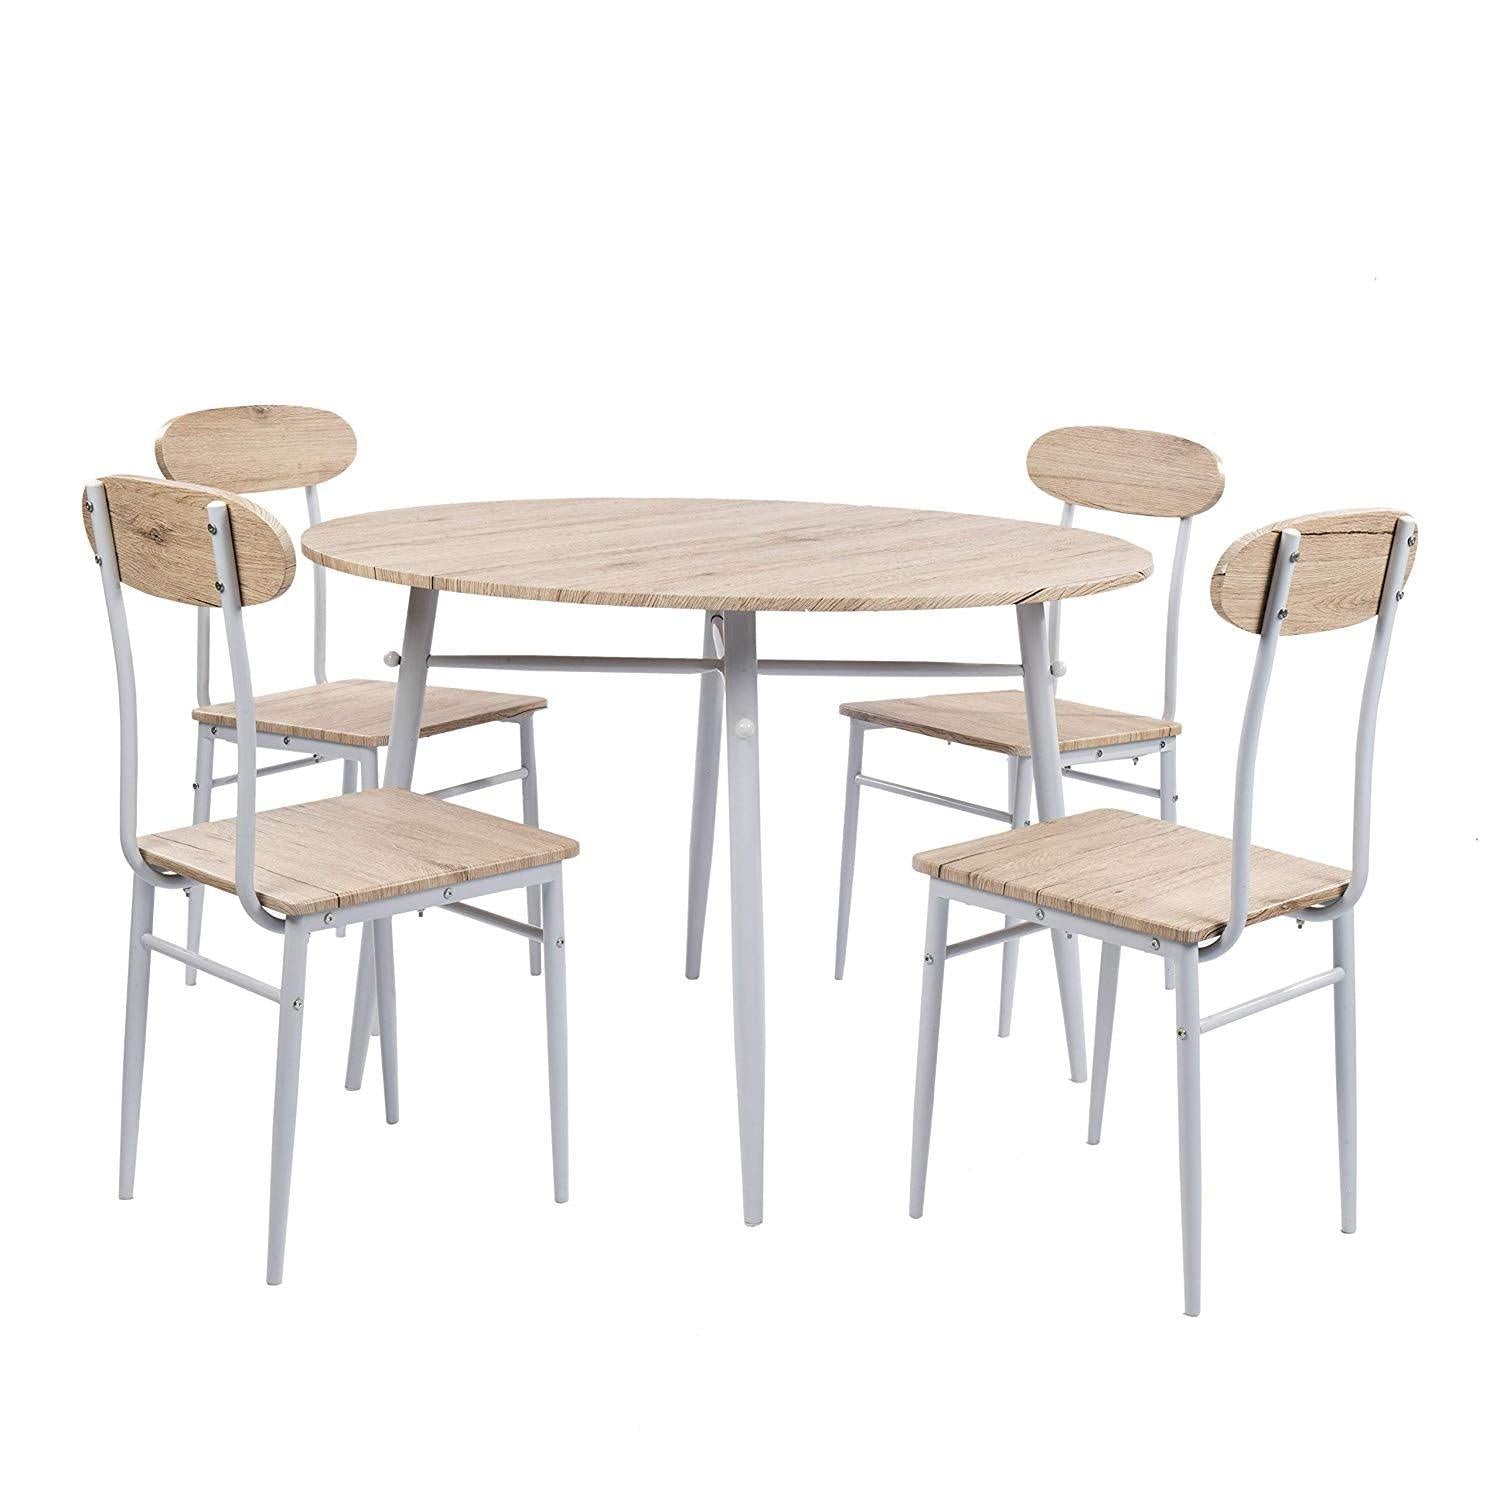 Bosonshop Round Dining Set, Country Style with Metal Legs, 5-Piece